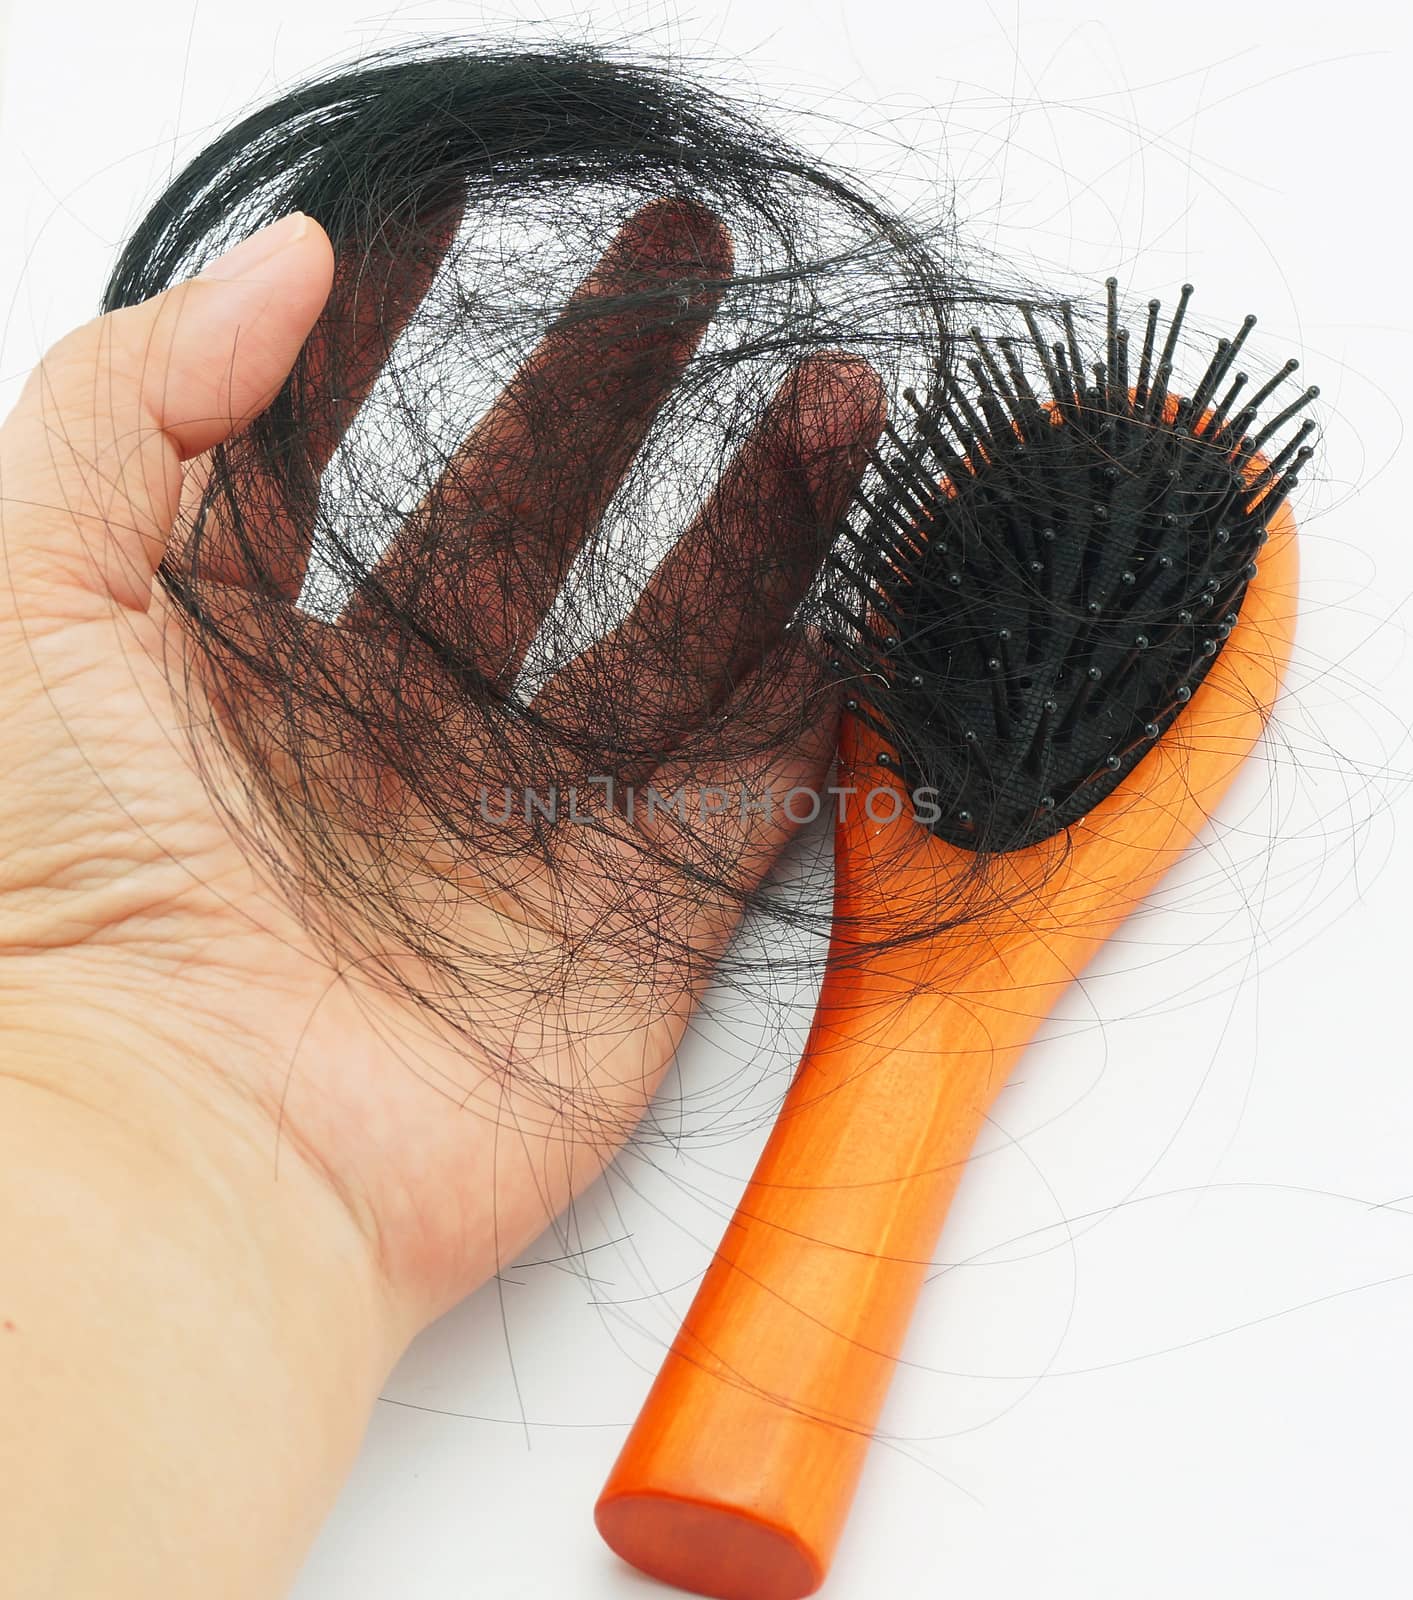 Many hair, fall out of your head after combing hair.                               